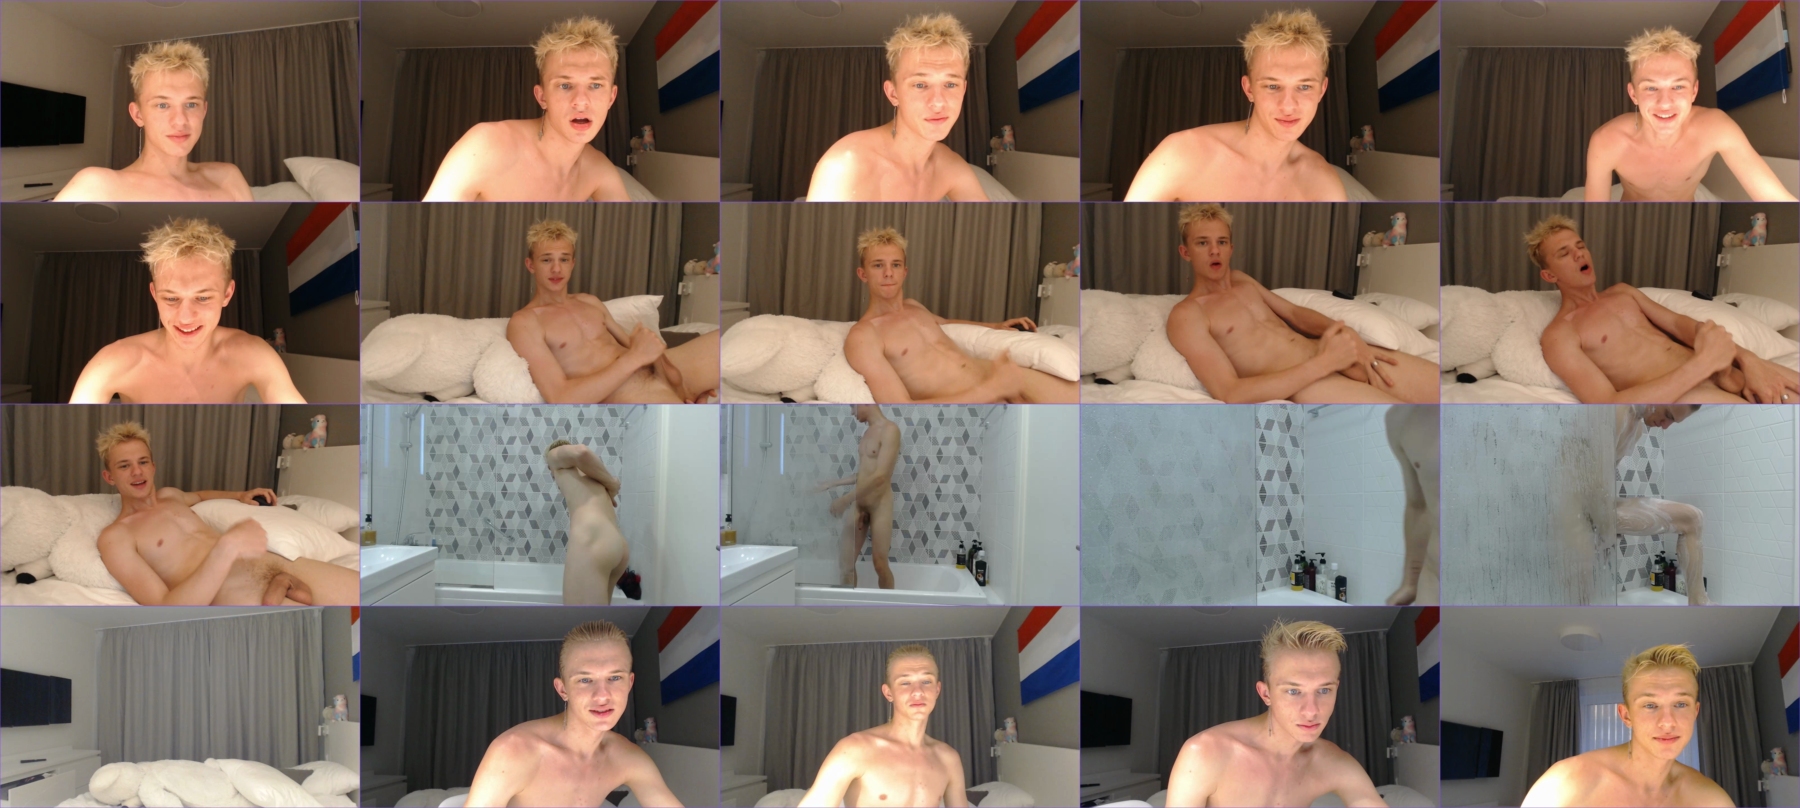 Andy_Bjorn Topless CAM SHOW @ Chaturbate 19-07-2021